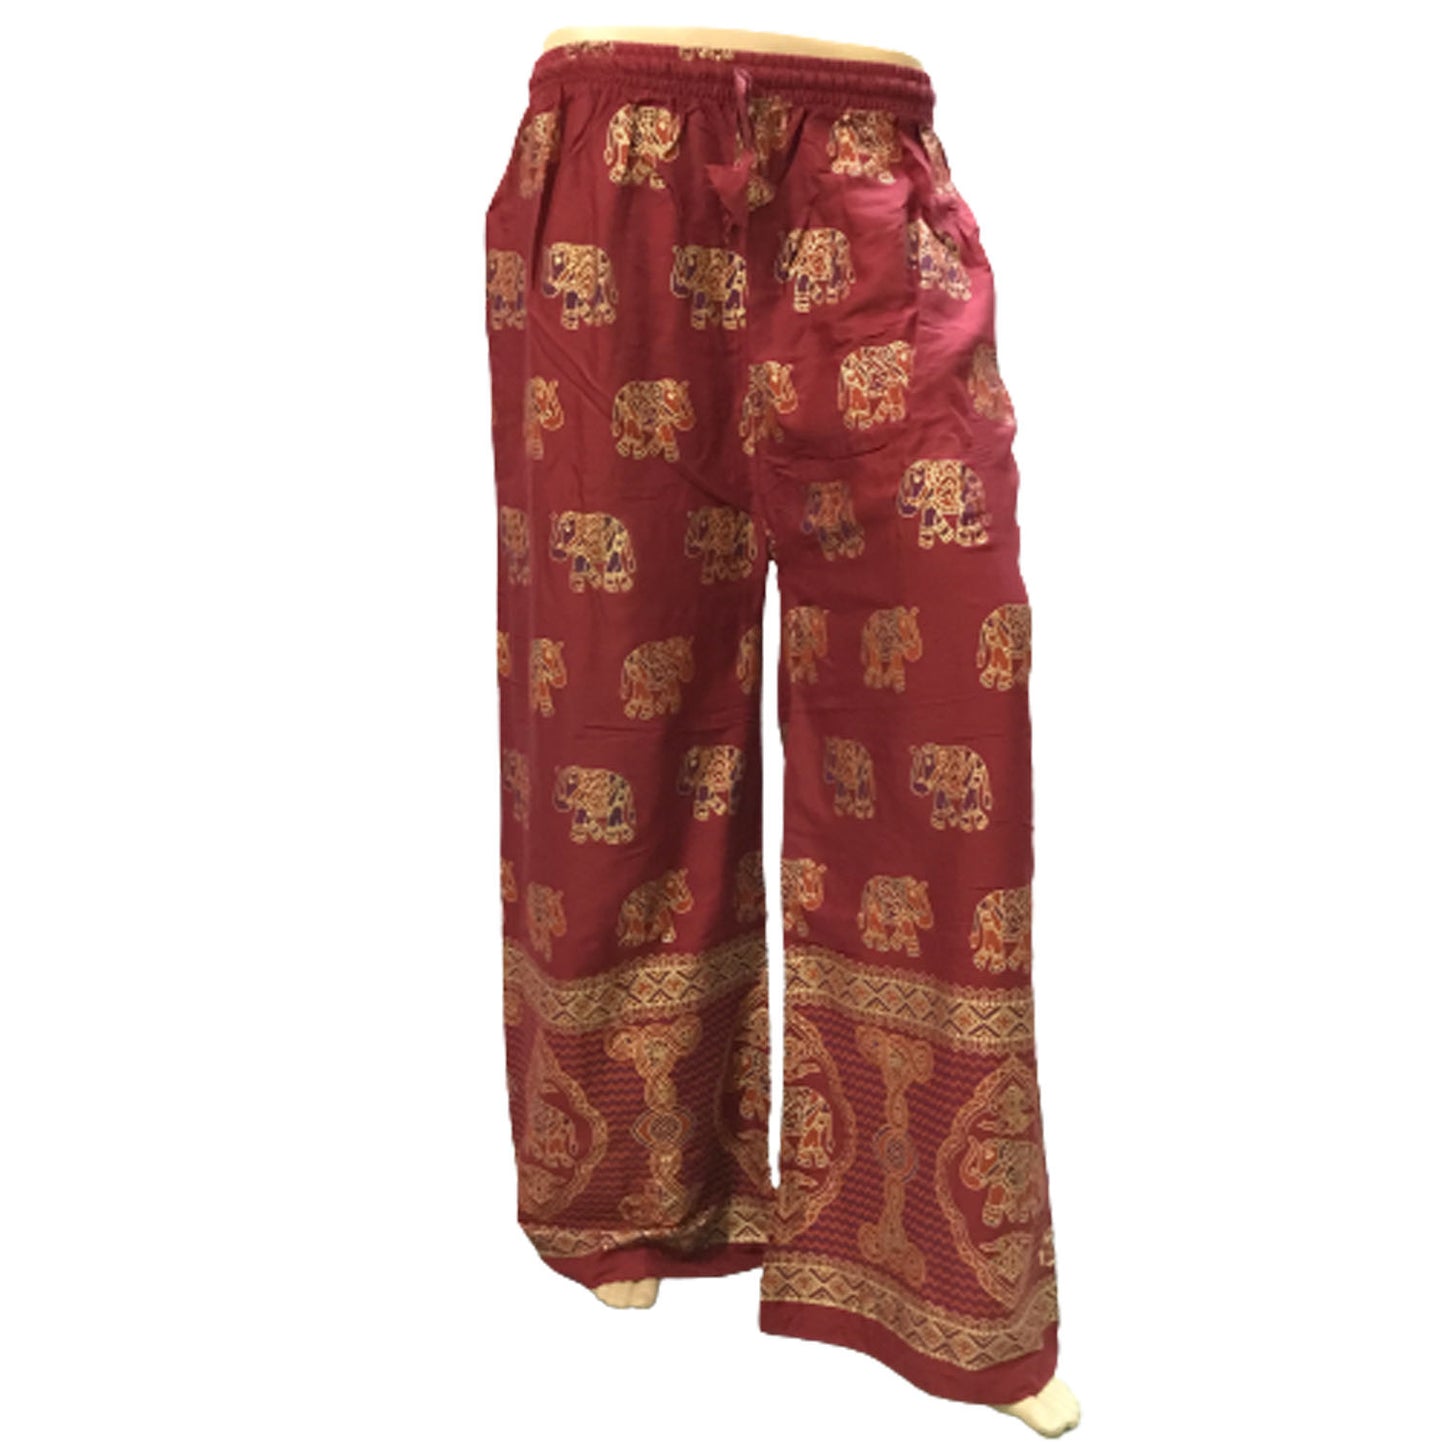 Ganesha Handicrafts Indian Style Elephant Print Solid Colour Loose Trousers, Trousers, loose Trousers, Colour Trousers, Print Trousers, Elephant Print Trousers, Indian Style Trousers, Indian Style Print Trousers, Maroon Trousers